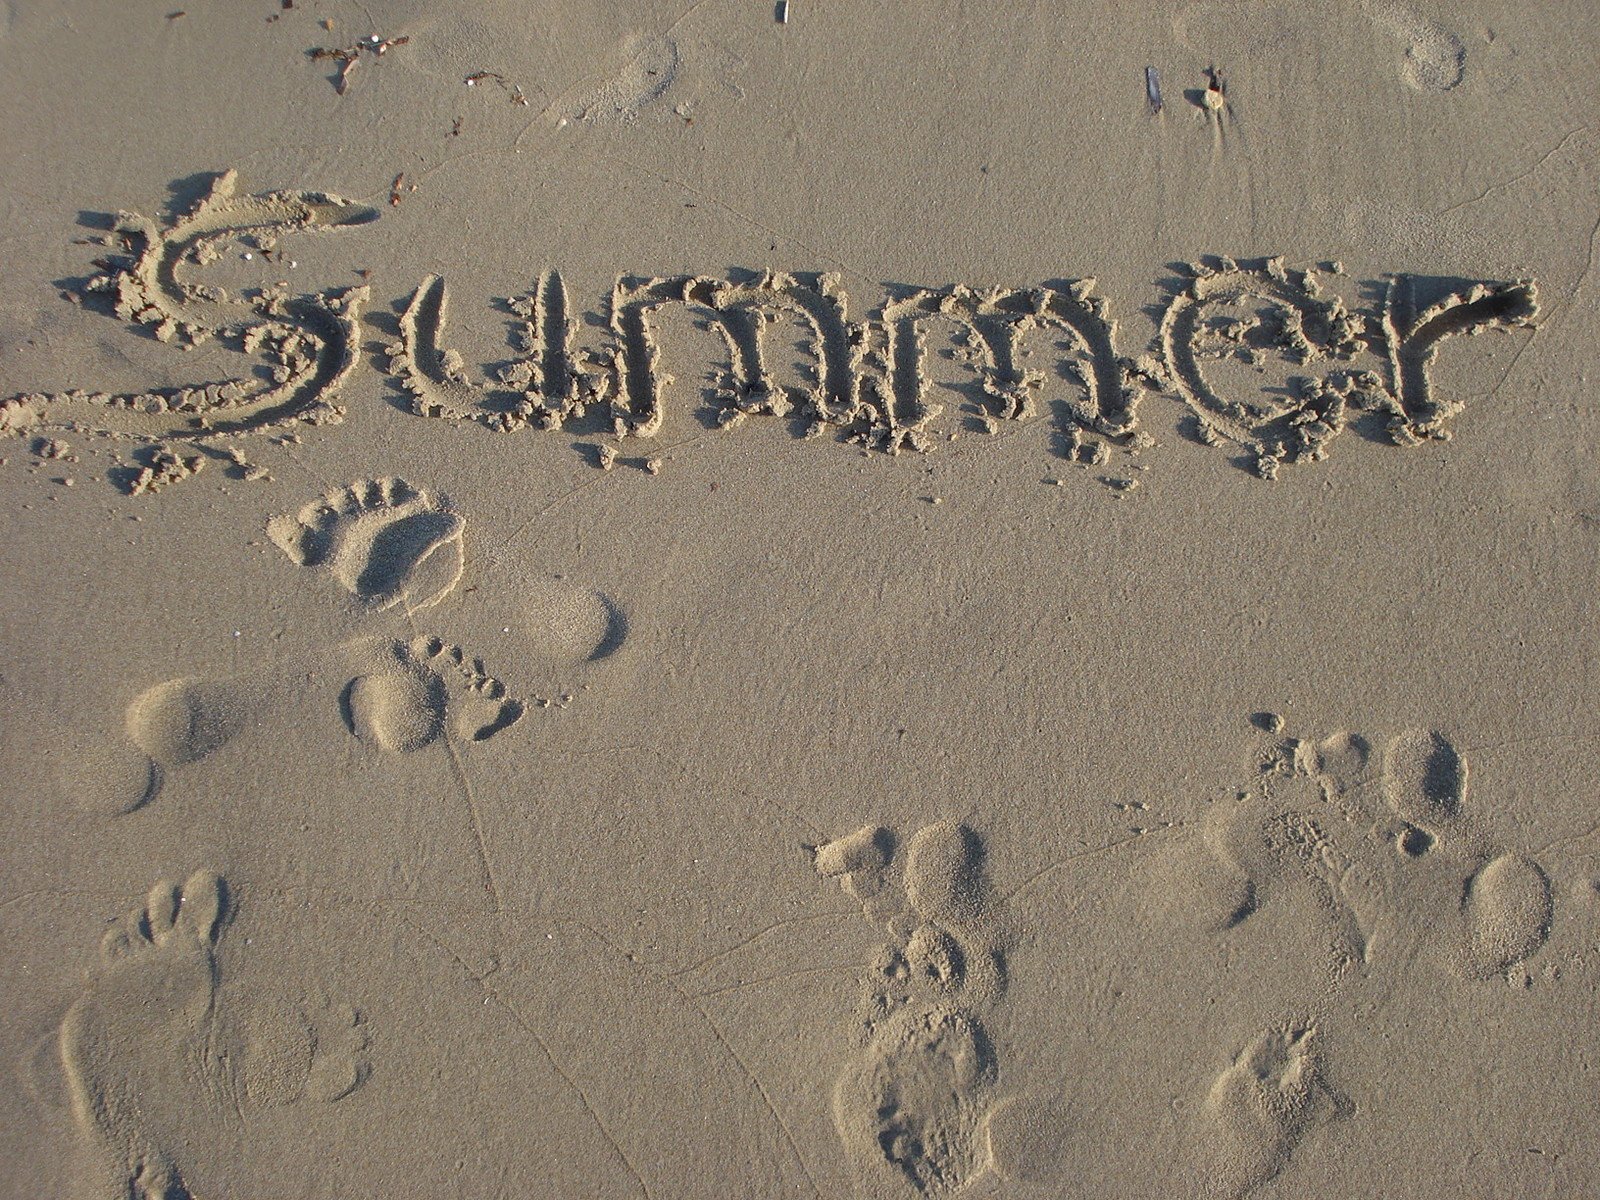 the word soing is written in sand with small prints